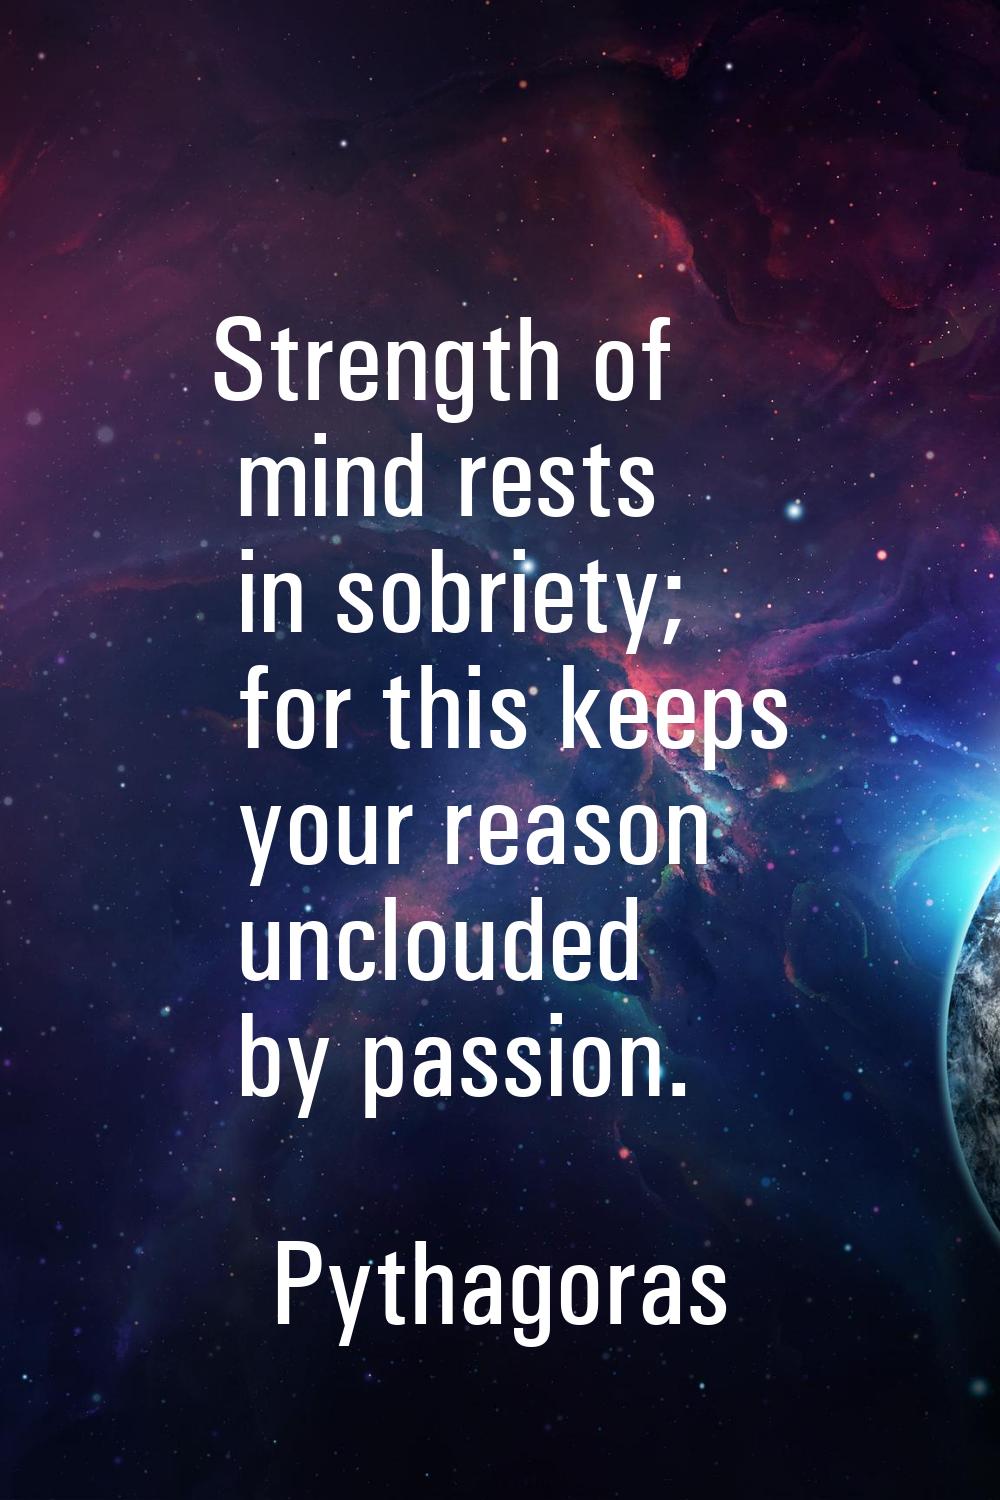 Strength of mind rests in sobriety; for this keeps your reason unclouded by passion.